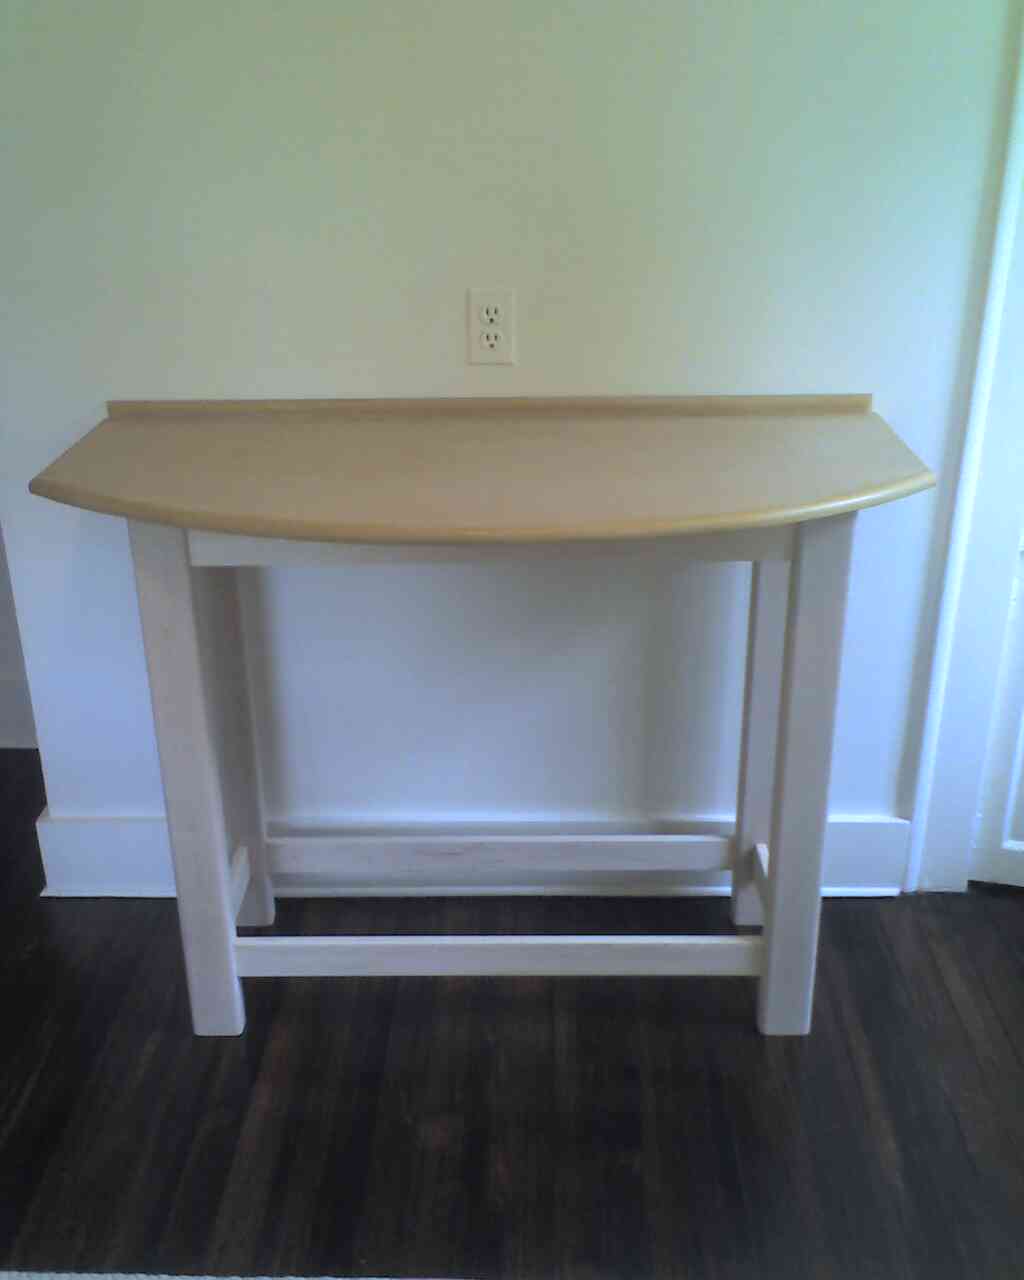 CUSTOM TABLES BUILT FOR YOUR NEEDS MANY DESIGNS AND STYLES CUSTOM FINISHING COLORS